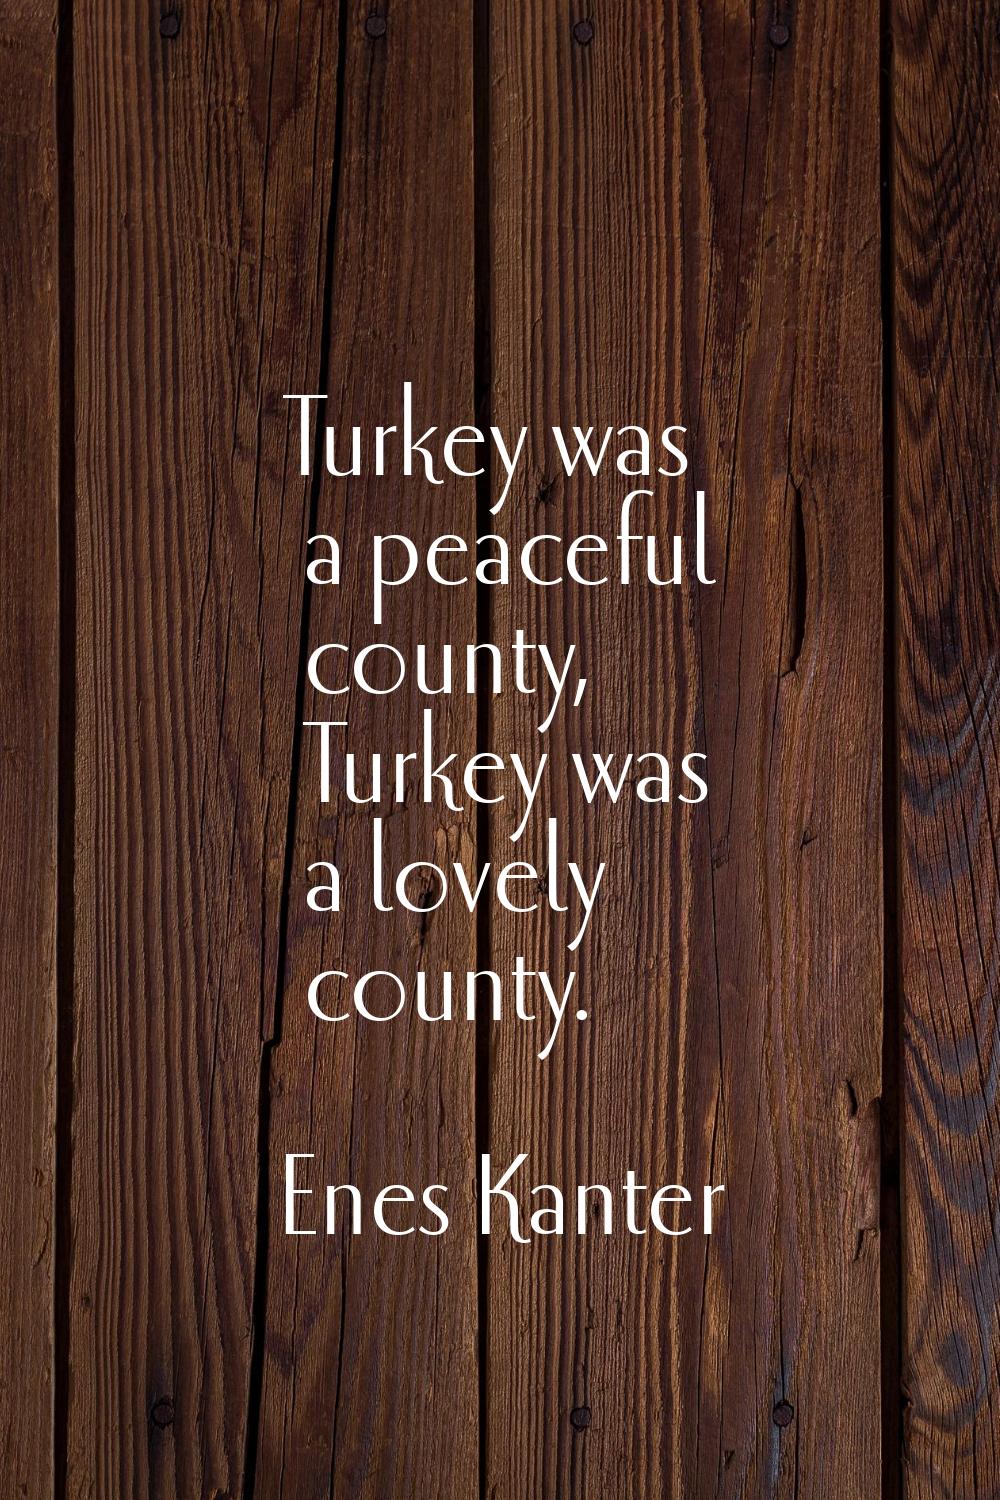 Turkey was a peaceful county, Turkey was a lovely county.